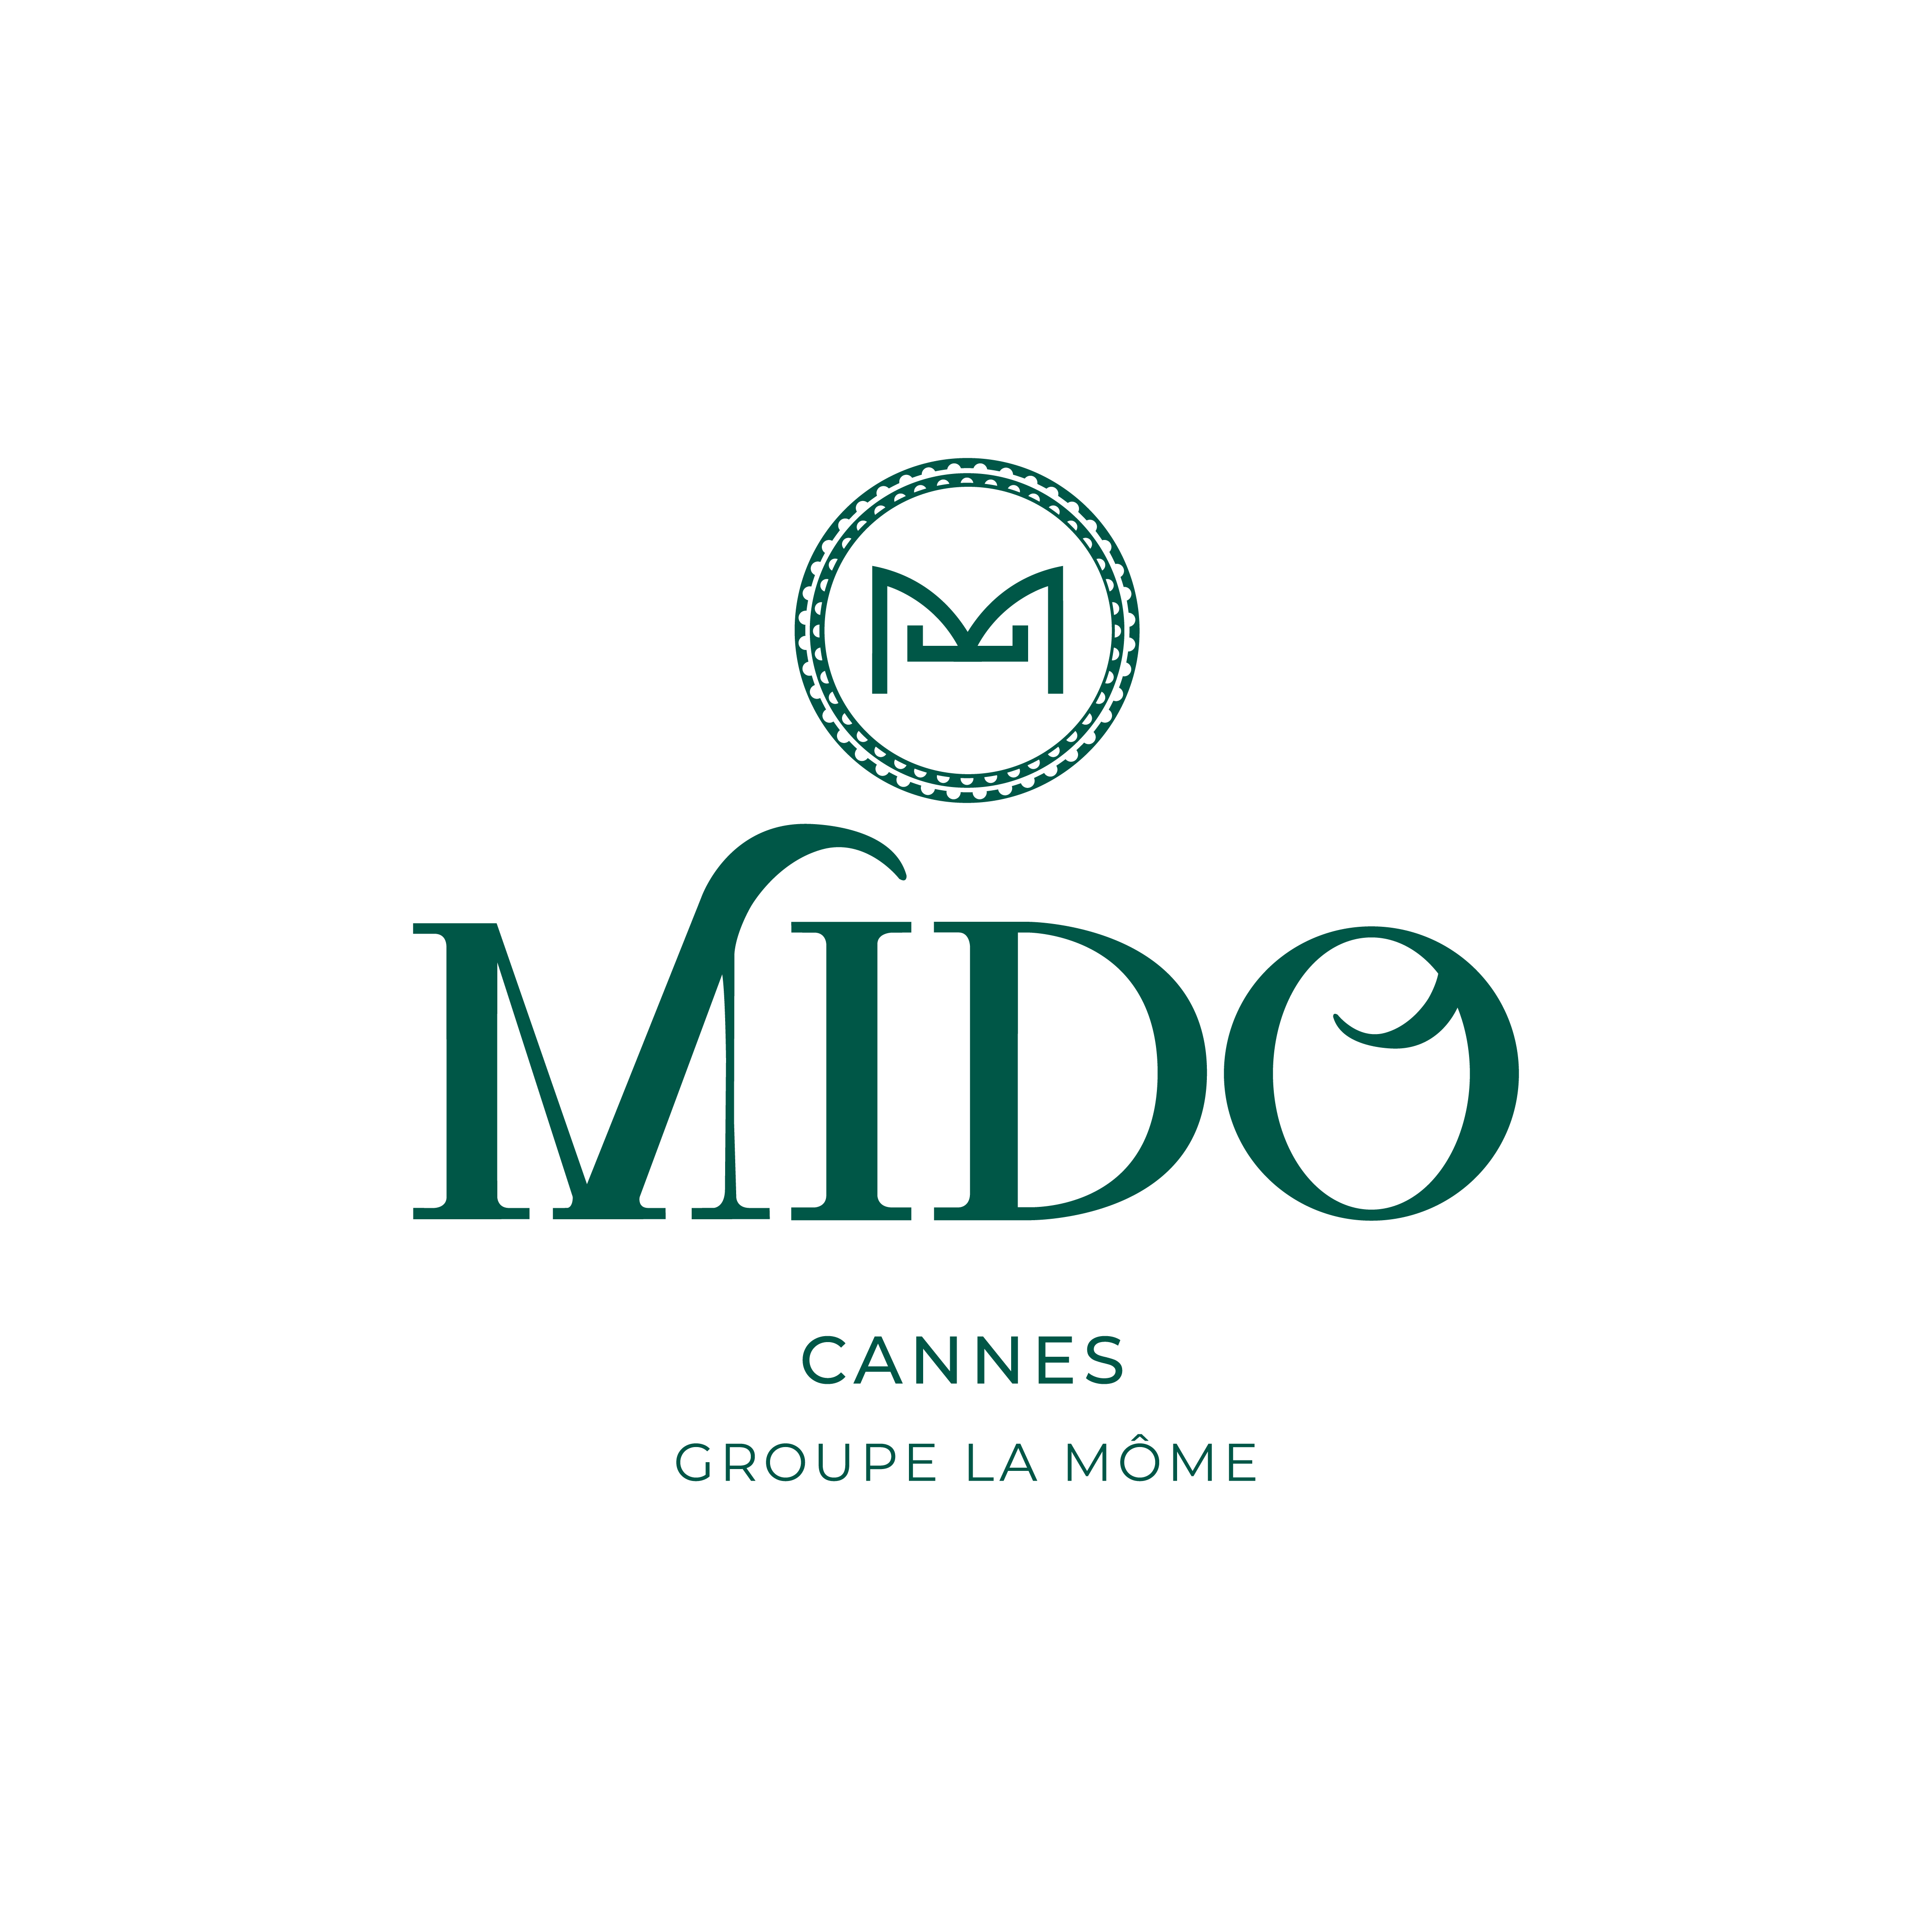 Mido Cannes